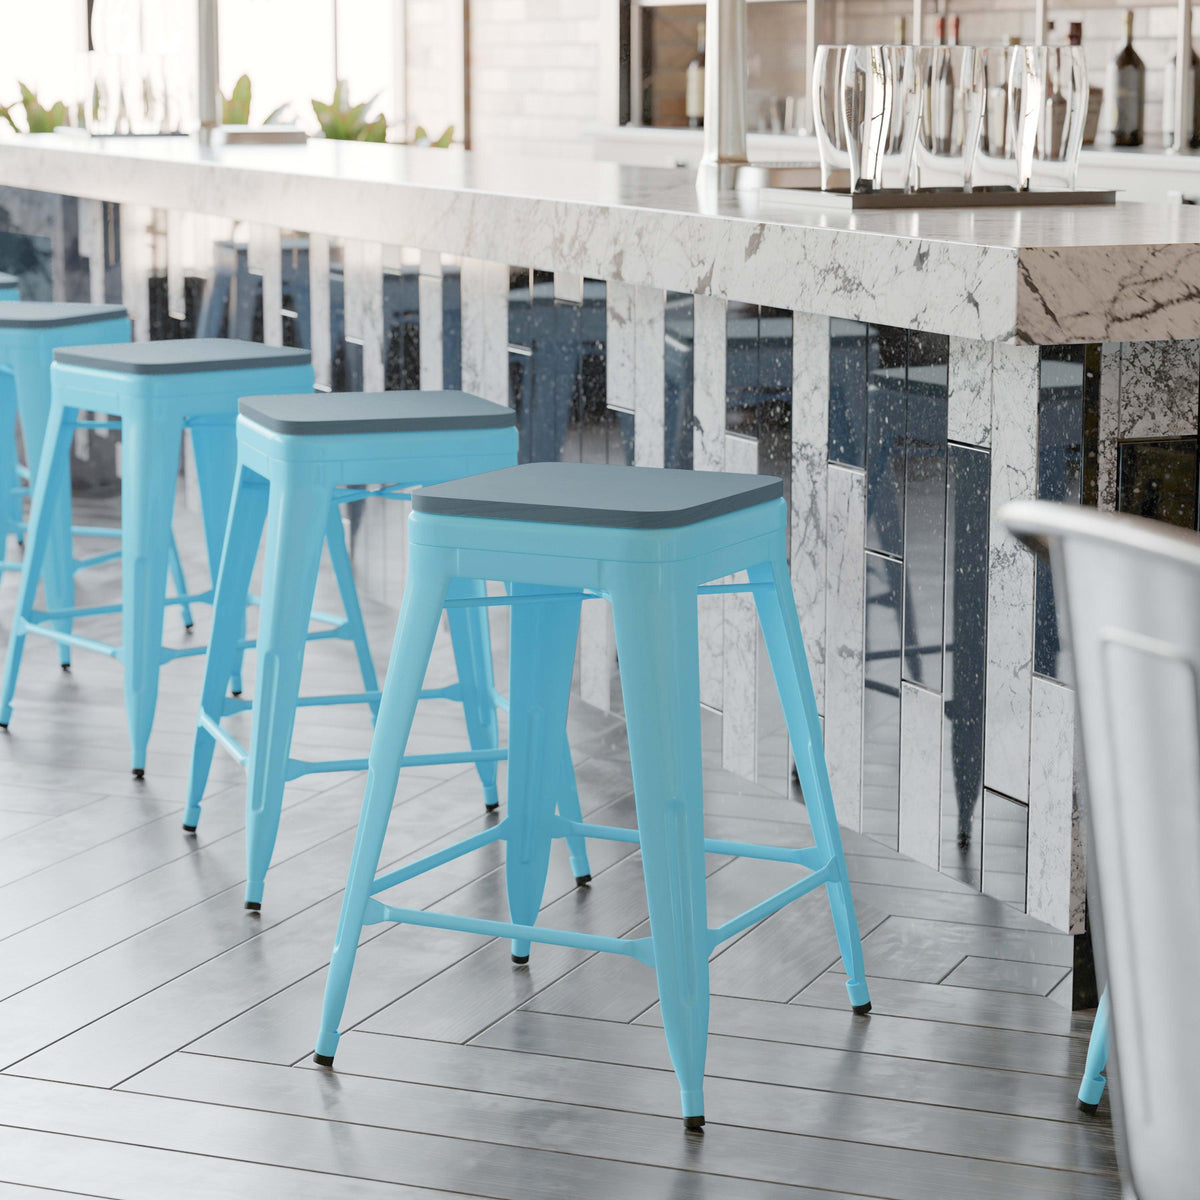 Teal-Blue Resin Wood Seat/Teal Frame |#| All-Weather Teal Commercial Backless Counter Stools-Teal Poly Seat-4 PK